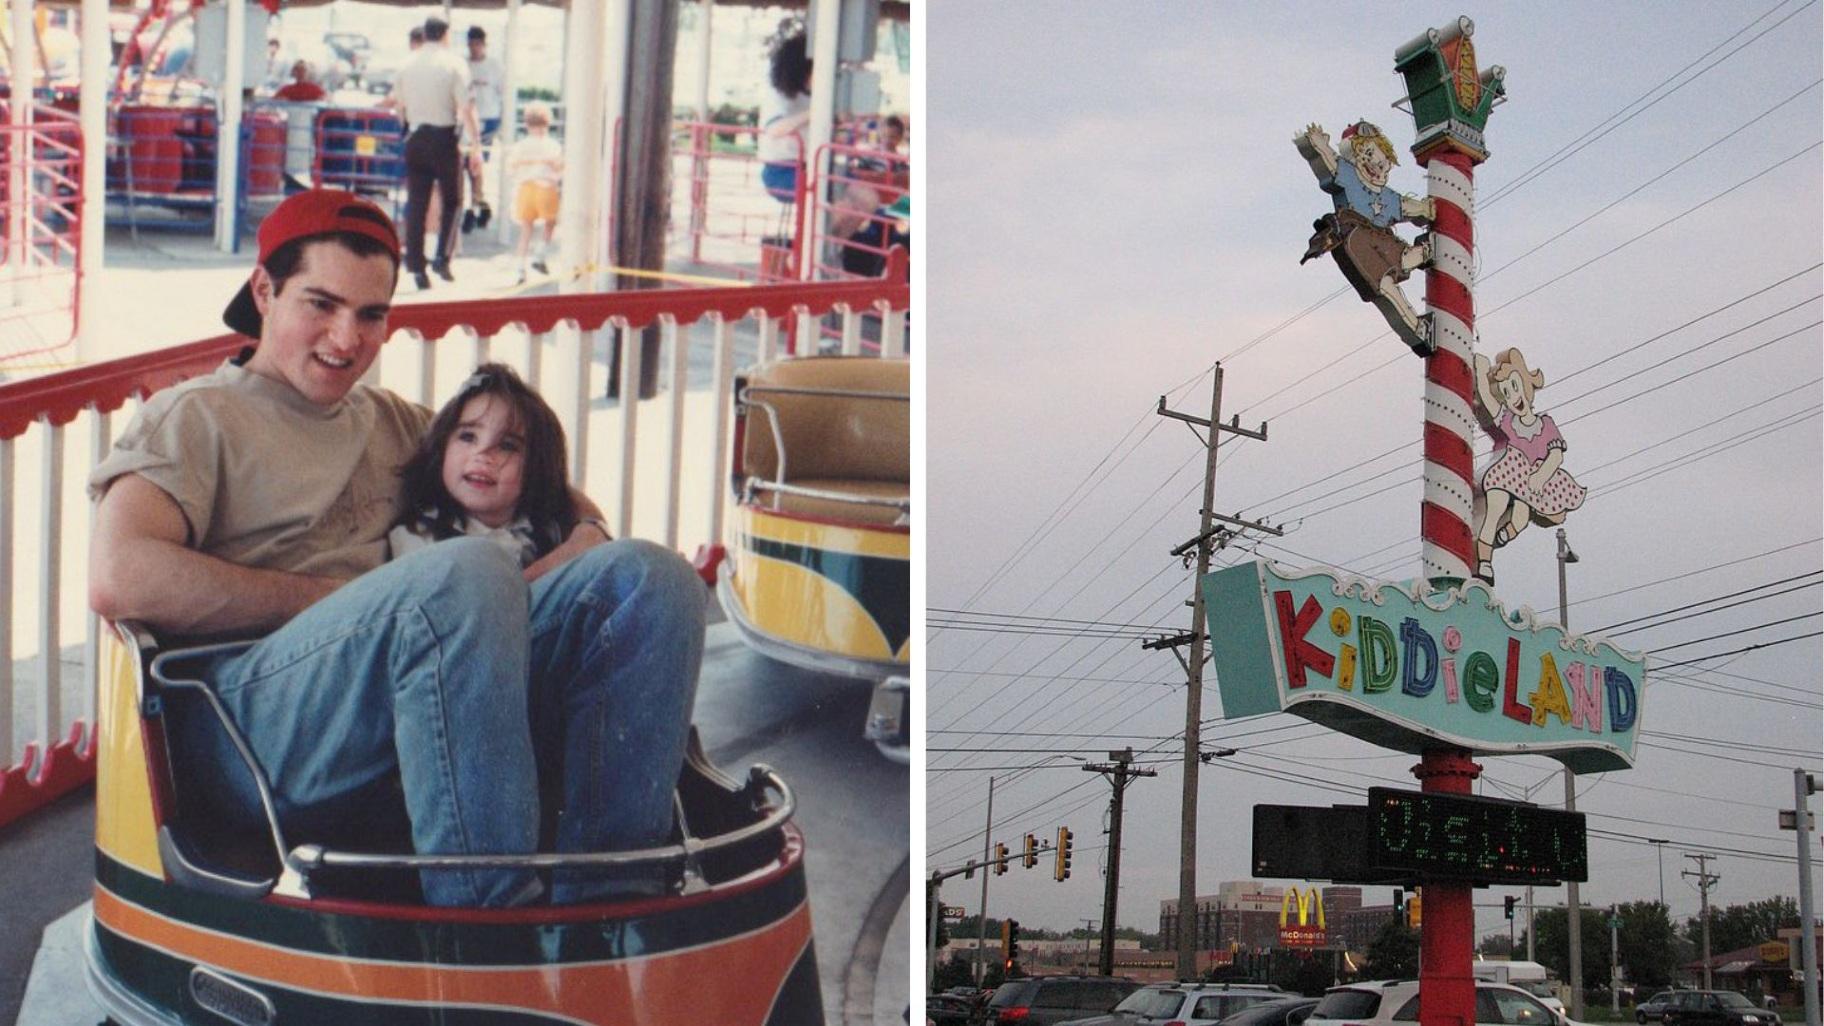 Left: WTTW News reporter Marc Vitali at Kiddieland Amusement Park in 1993. (Provided) Right: The Kiddieland sign in 2009. (Jeremy Thompson)